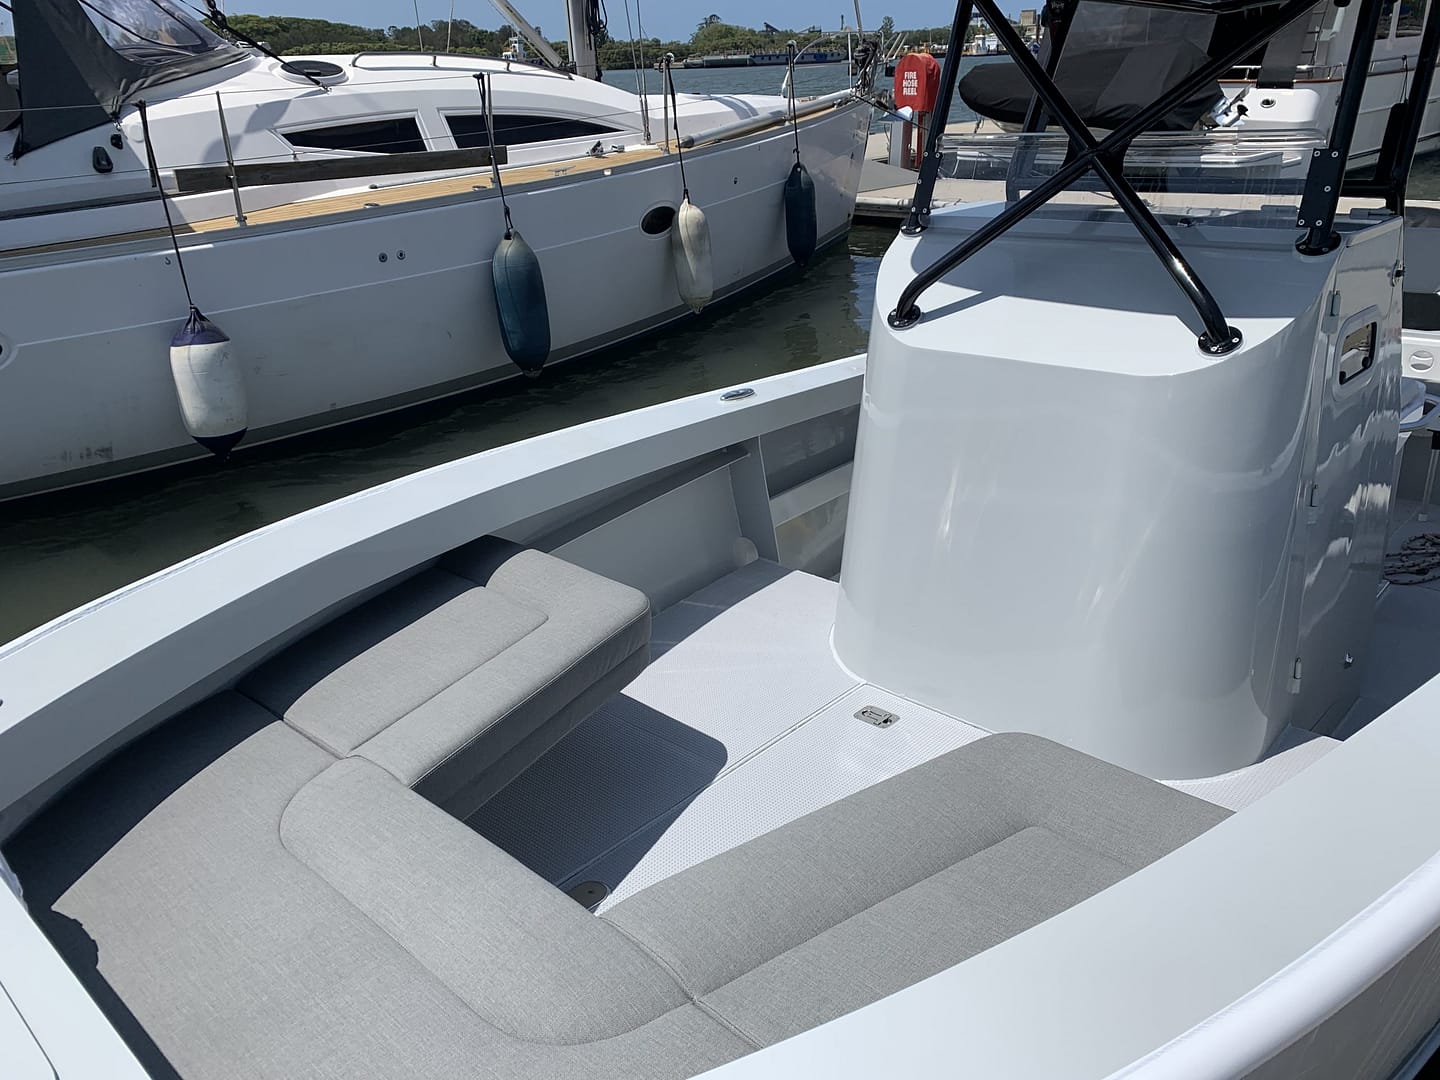 custom plate boat high quality paint finish foredeck cushions